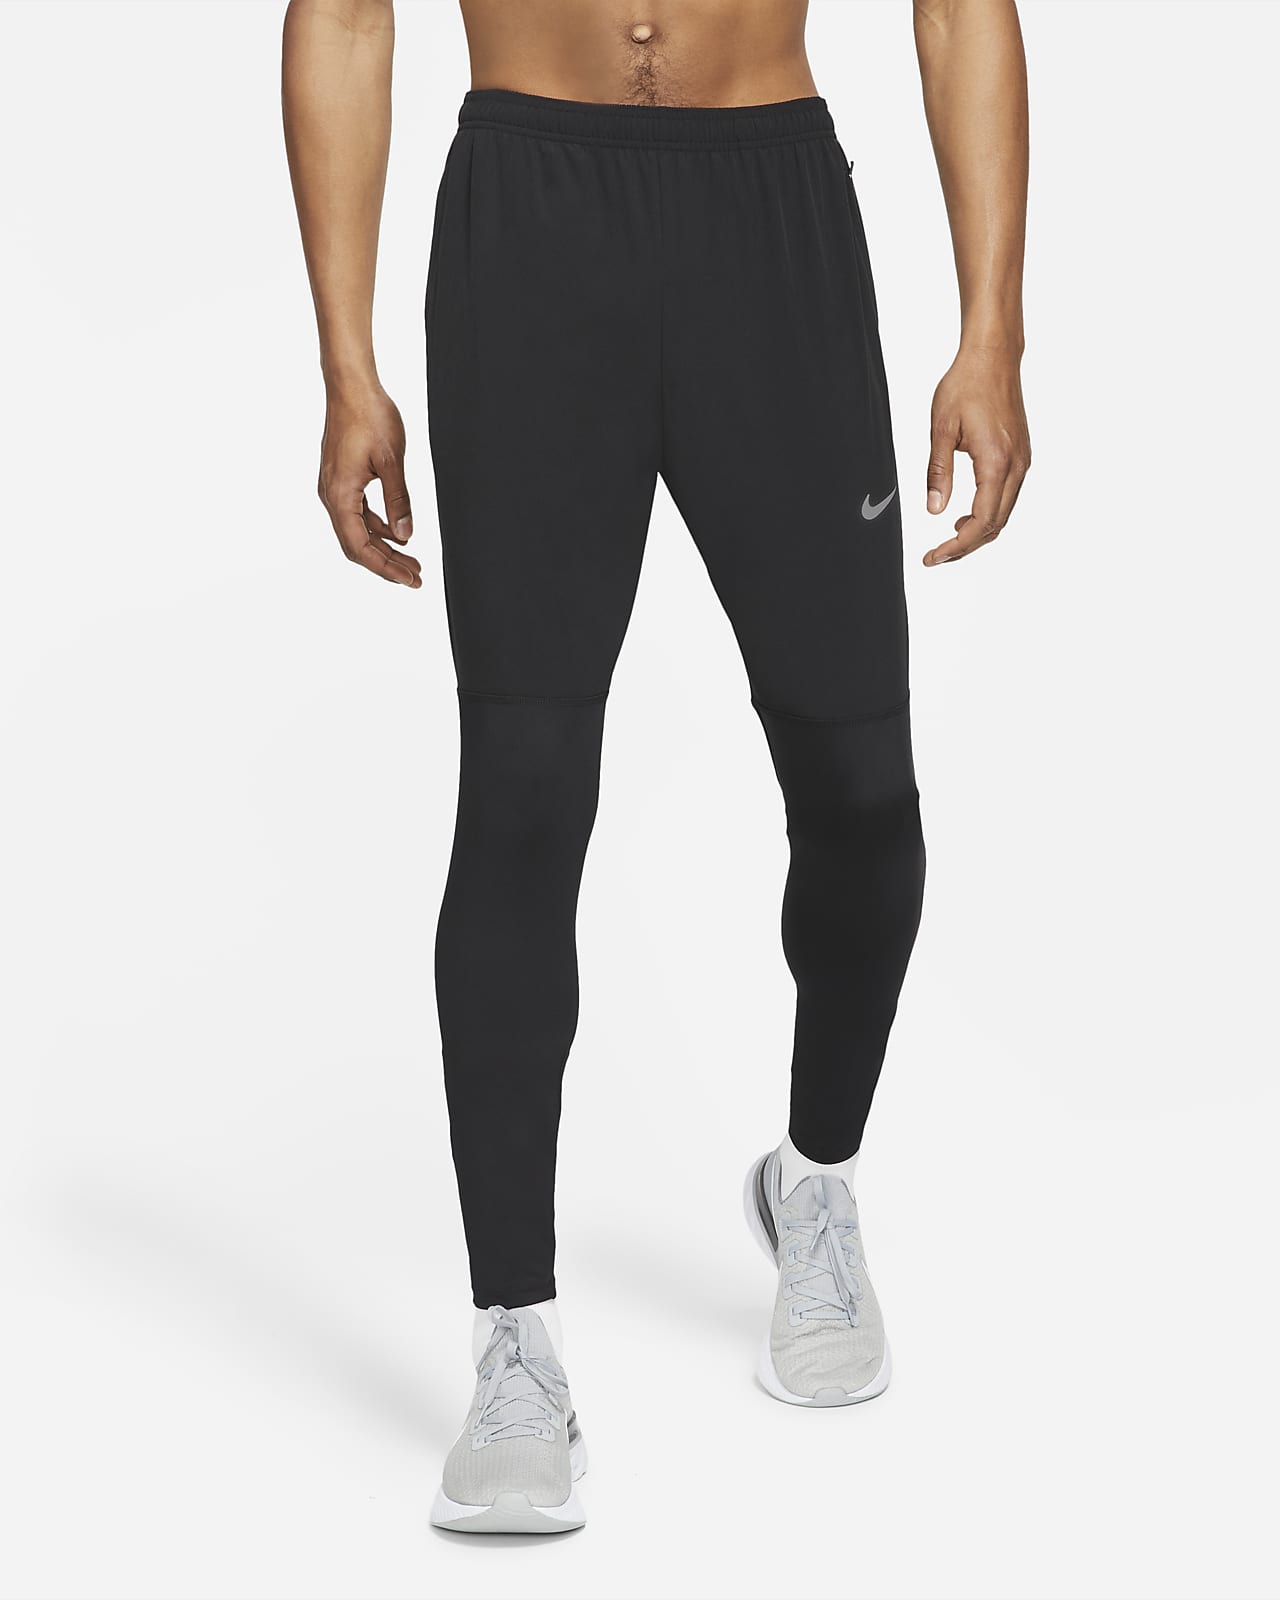 Woven Hybrid Running Trousers. Nike IL